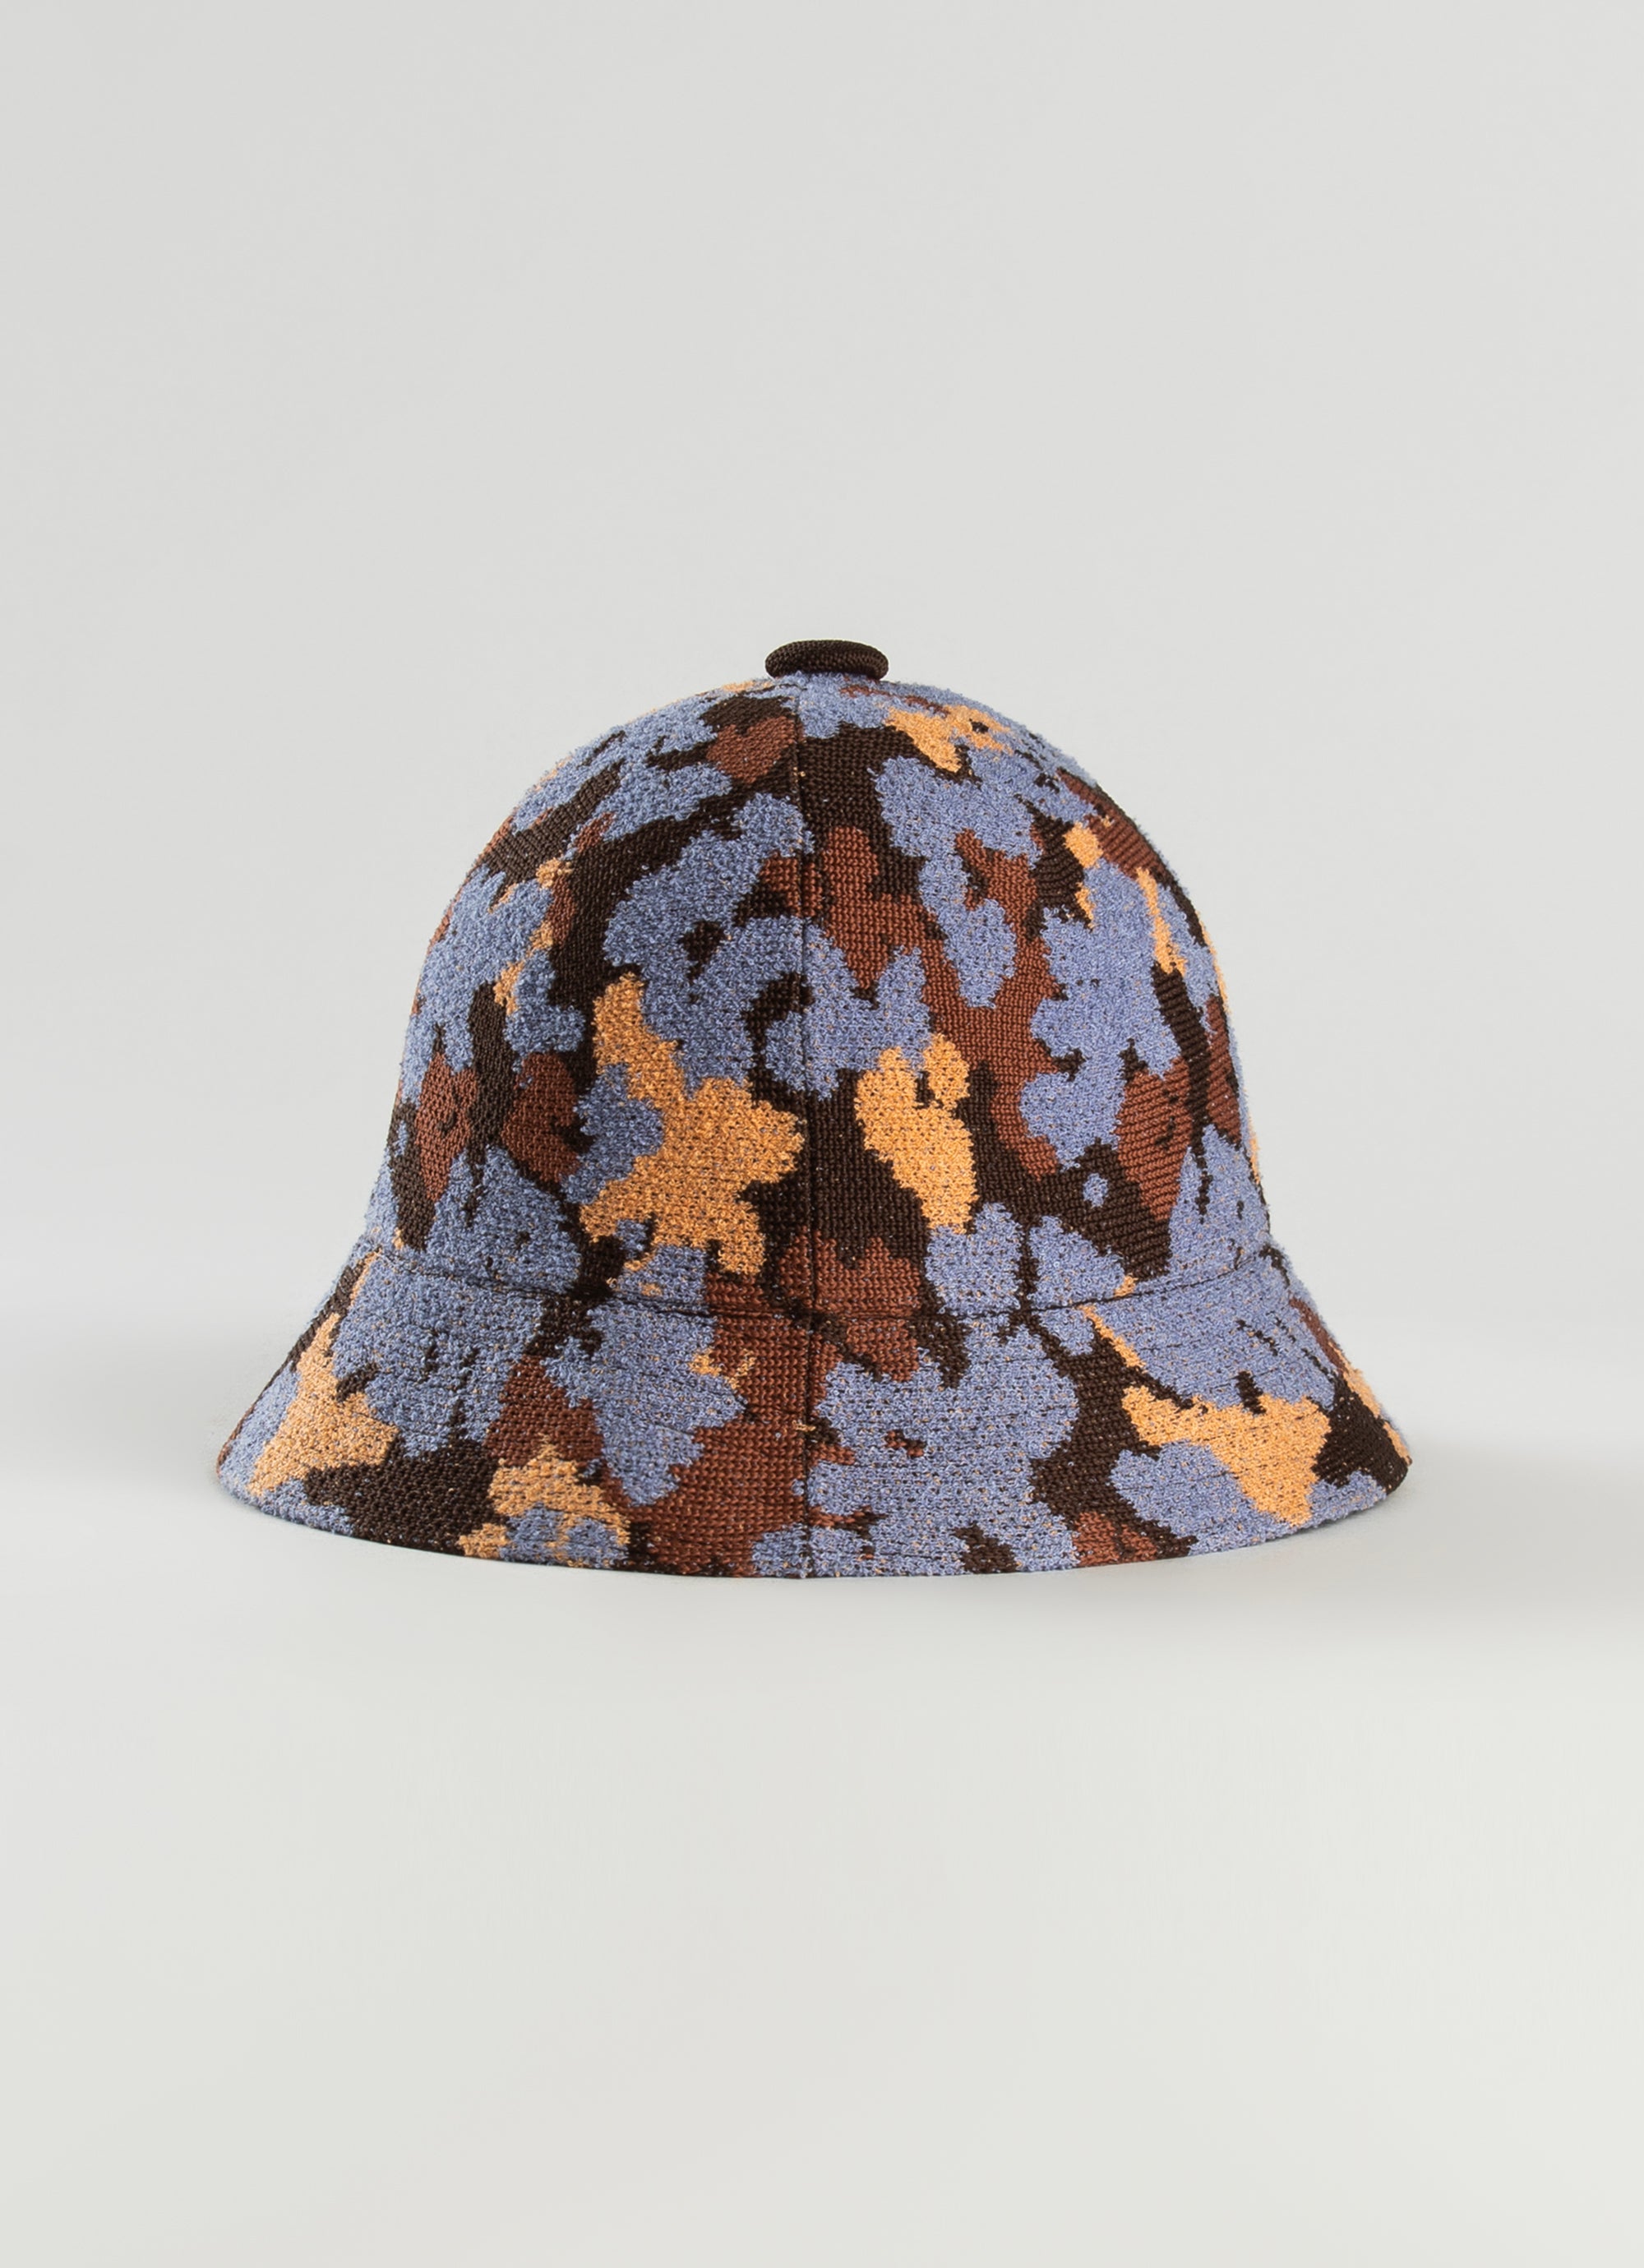 Camouflaged Men's Bucket Hats - Blend Into Nature with Style and Functionality